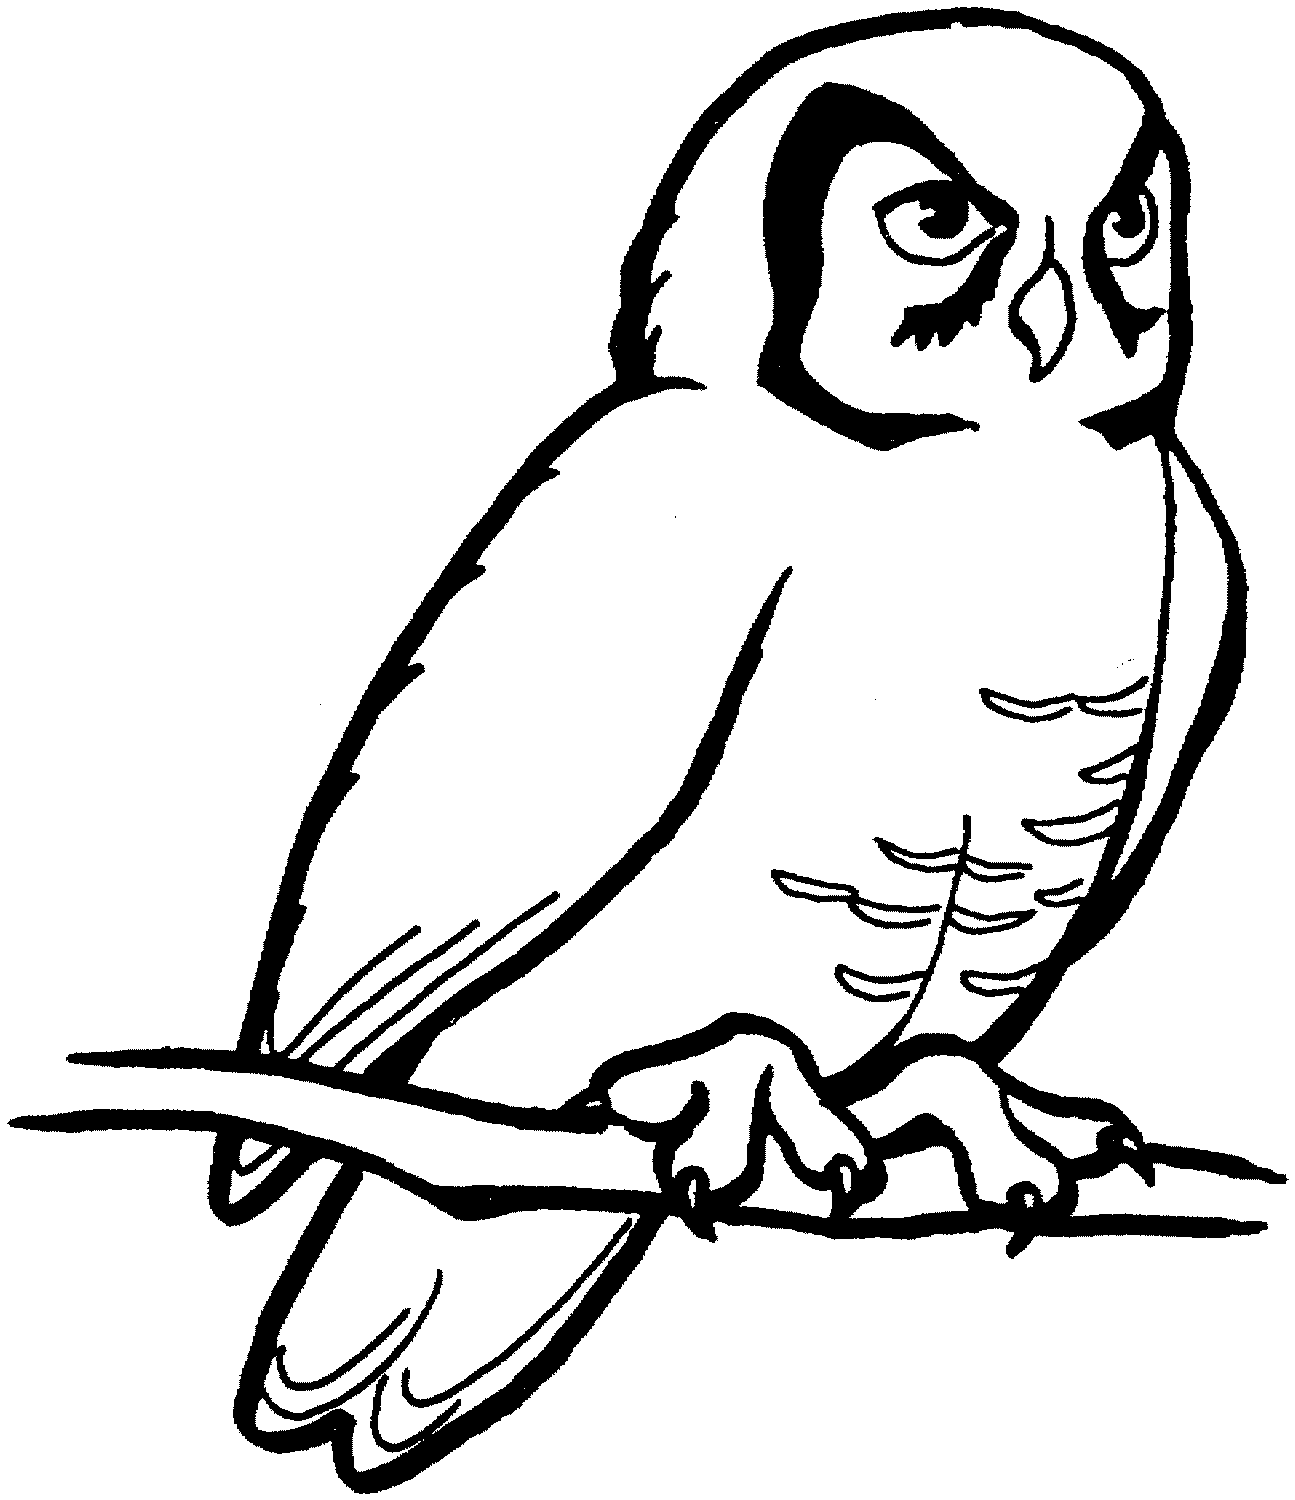 Free Owl Black And White Clipart